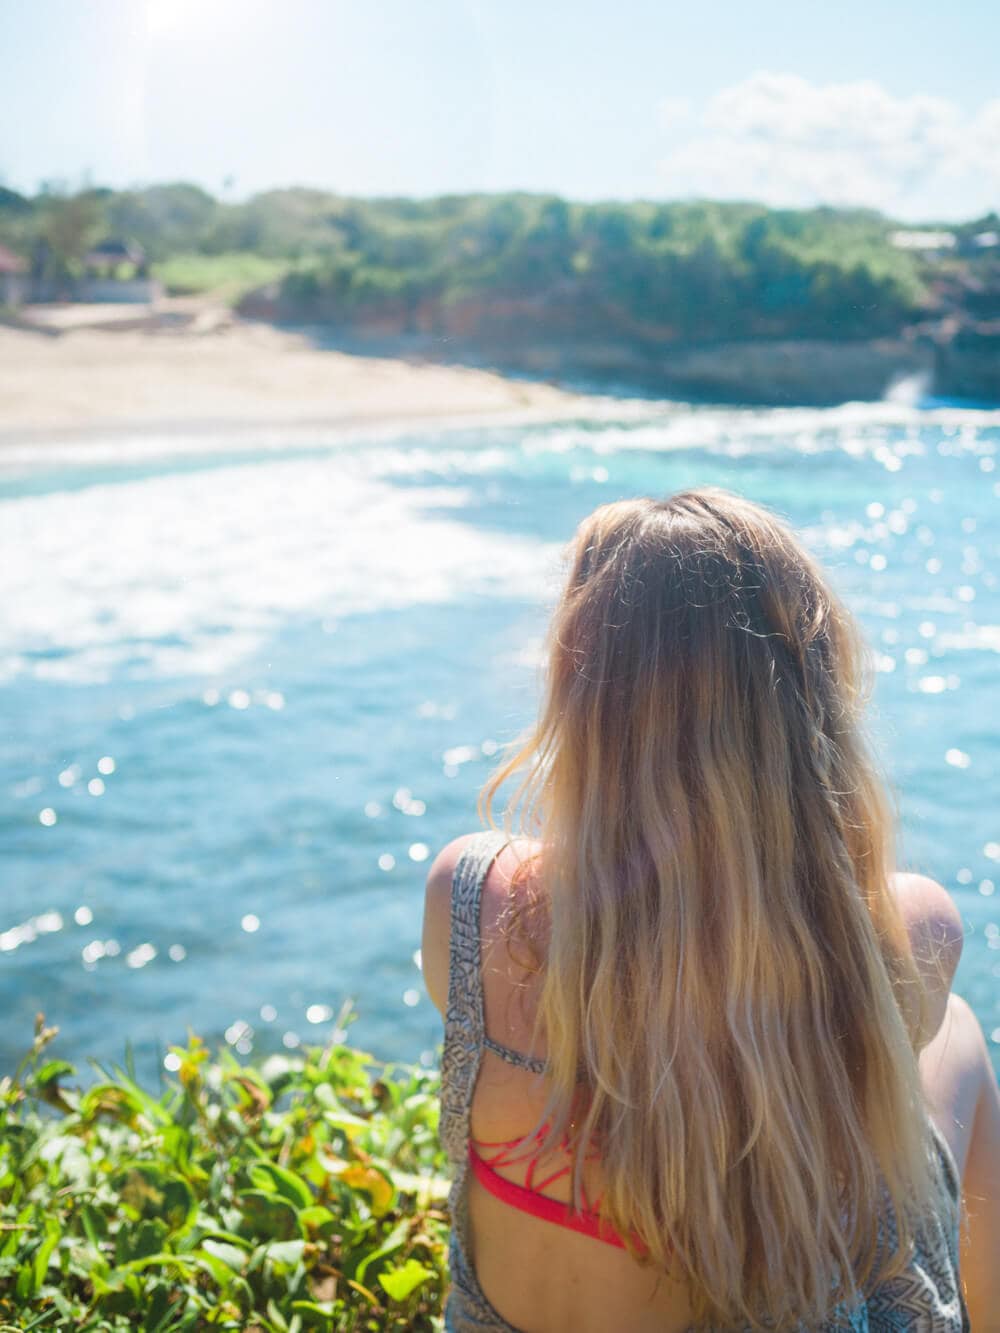 Girl with long hair wearing a red bikini and grey dress looking out over the turquoise water towards Dream Beach on a day trip to Nusa Lembongan.